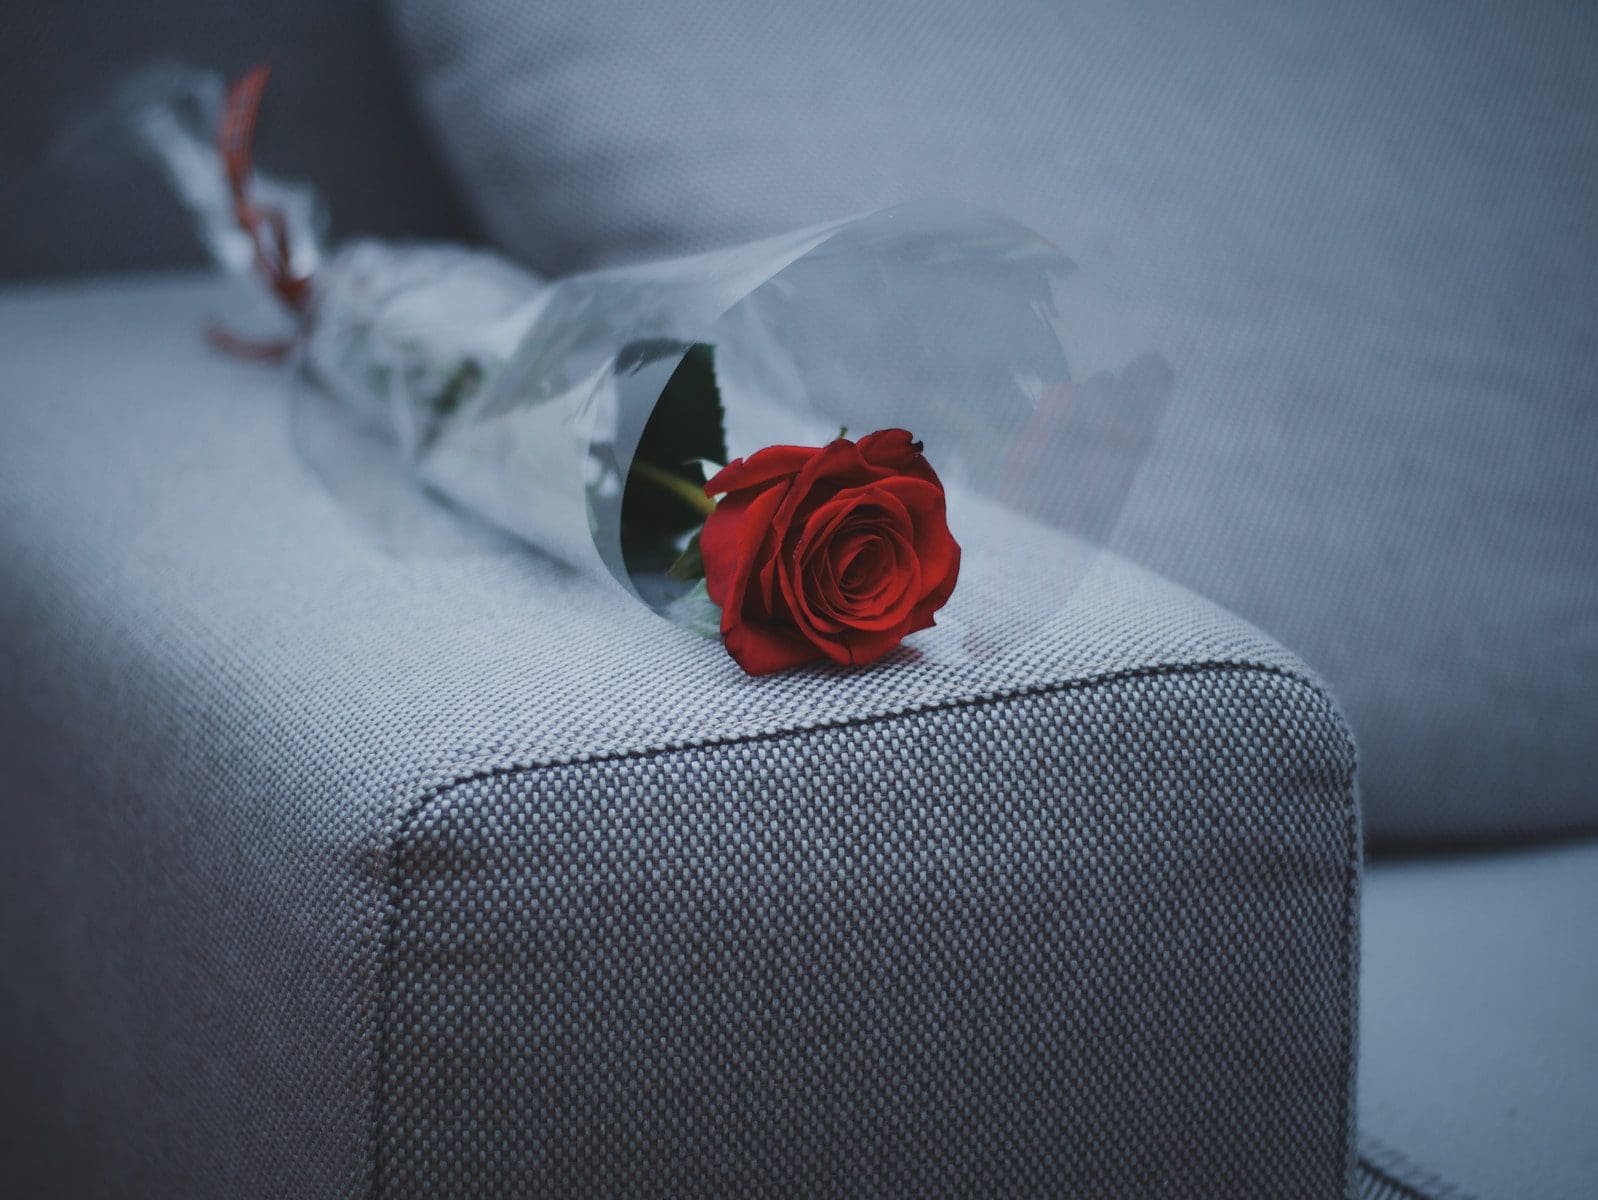 uses of flowers red rose flower on gray fabric sofa